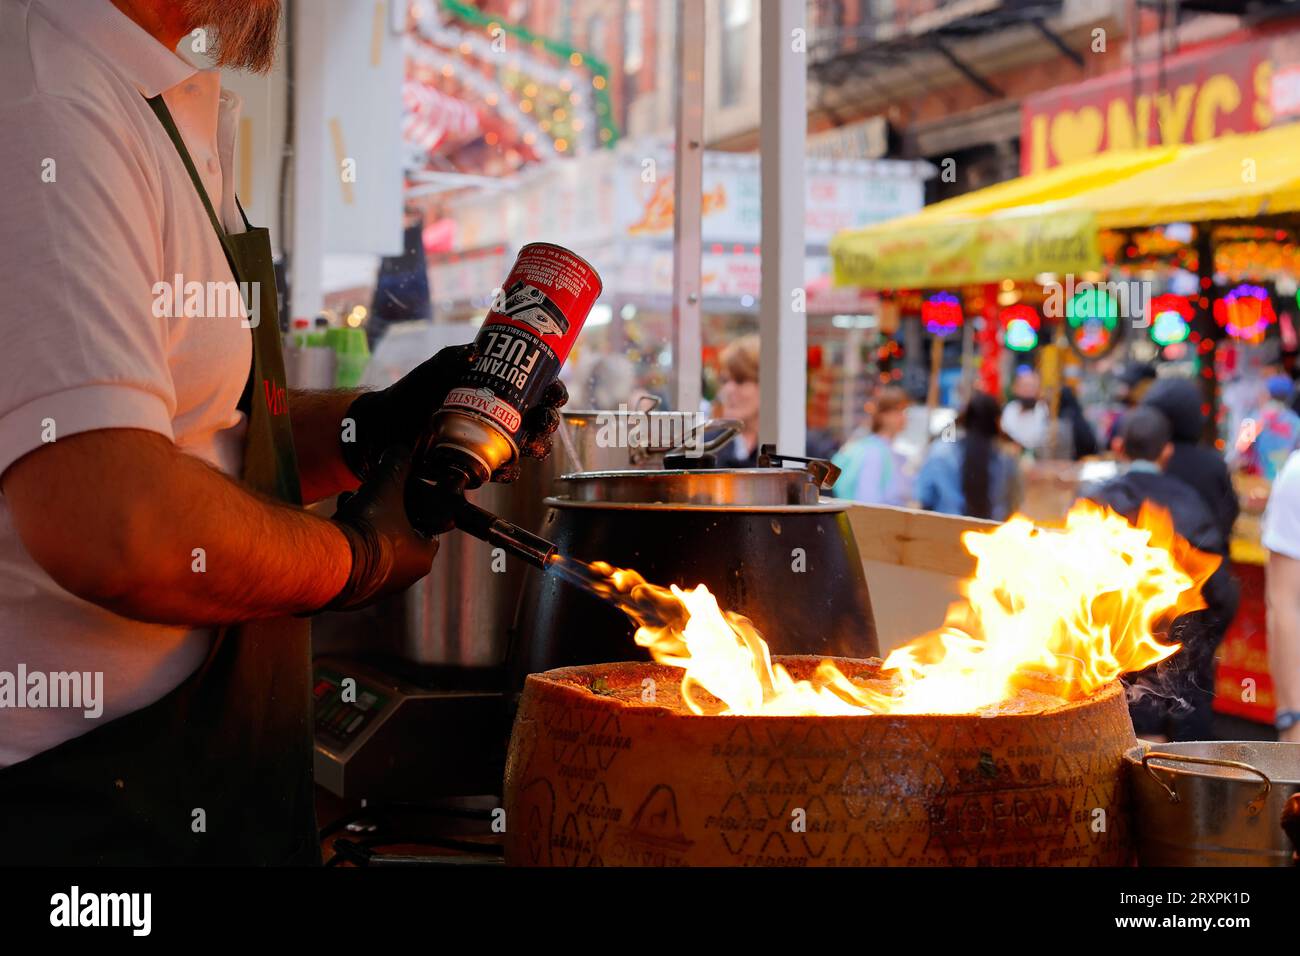 A Mrs Claus Cafe chef melts a wheel of Grana Padano with a blowtorch to make Cheese Wheel Pasta, at the San Gennaro Feast, New York City. Stock Photo